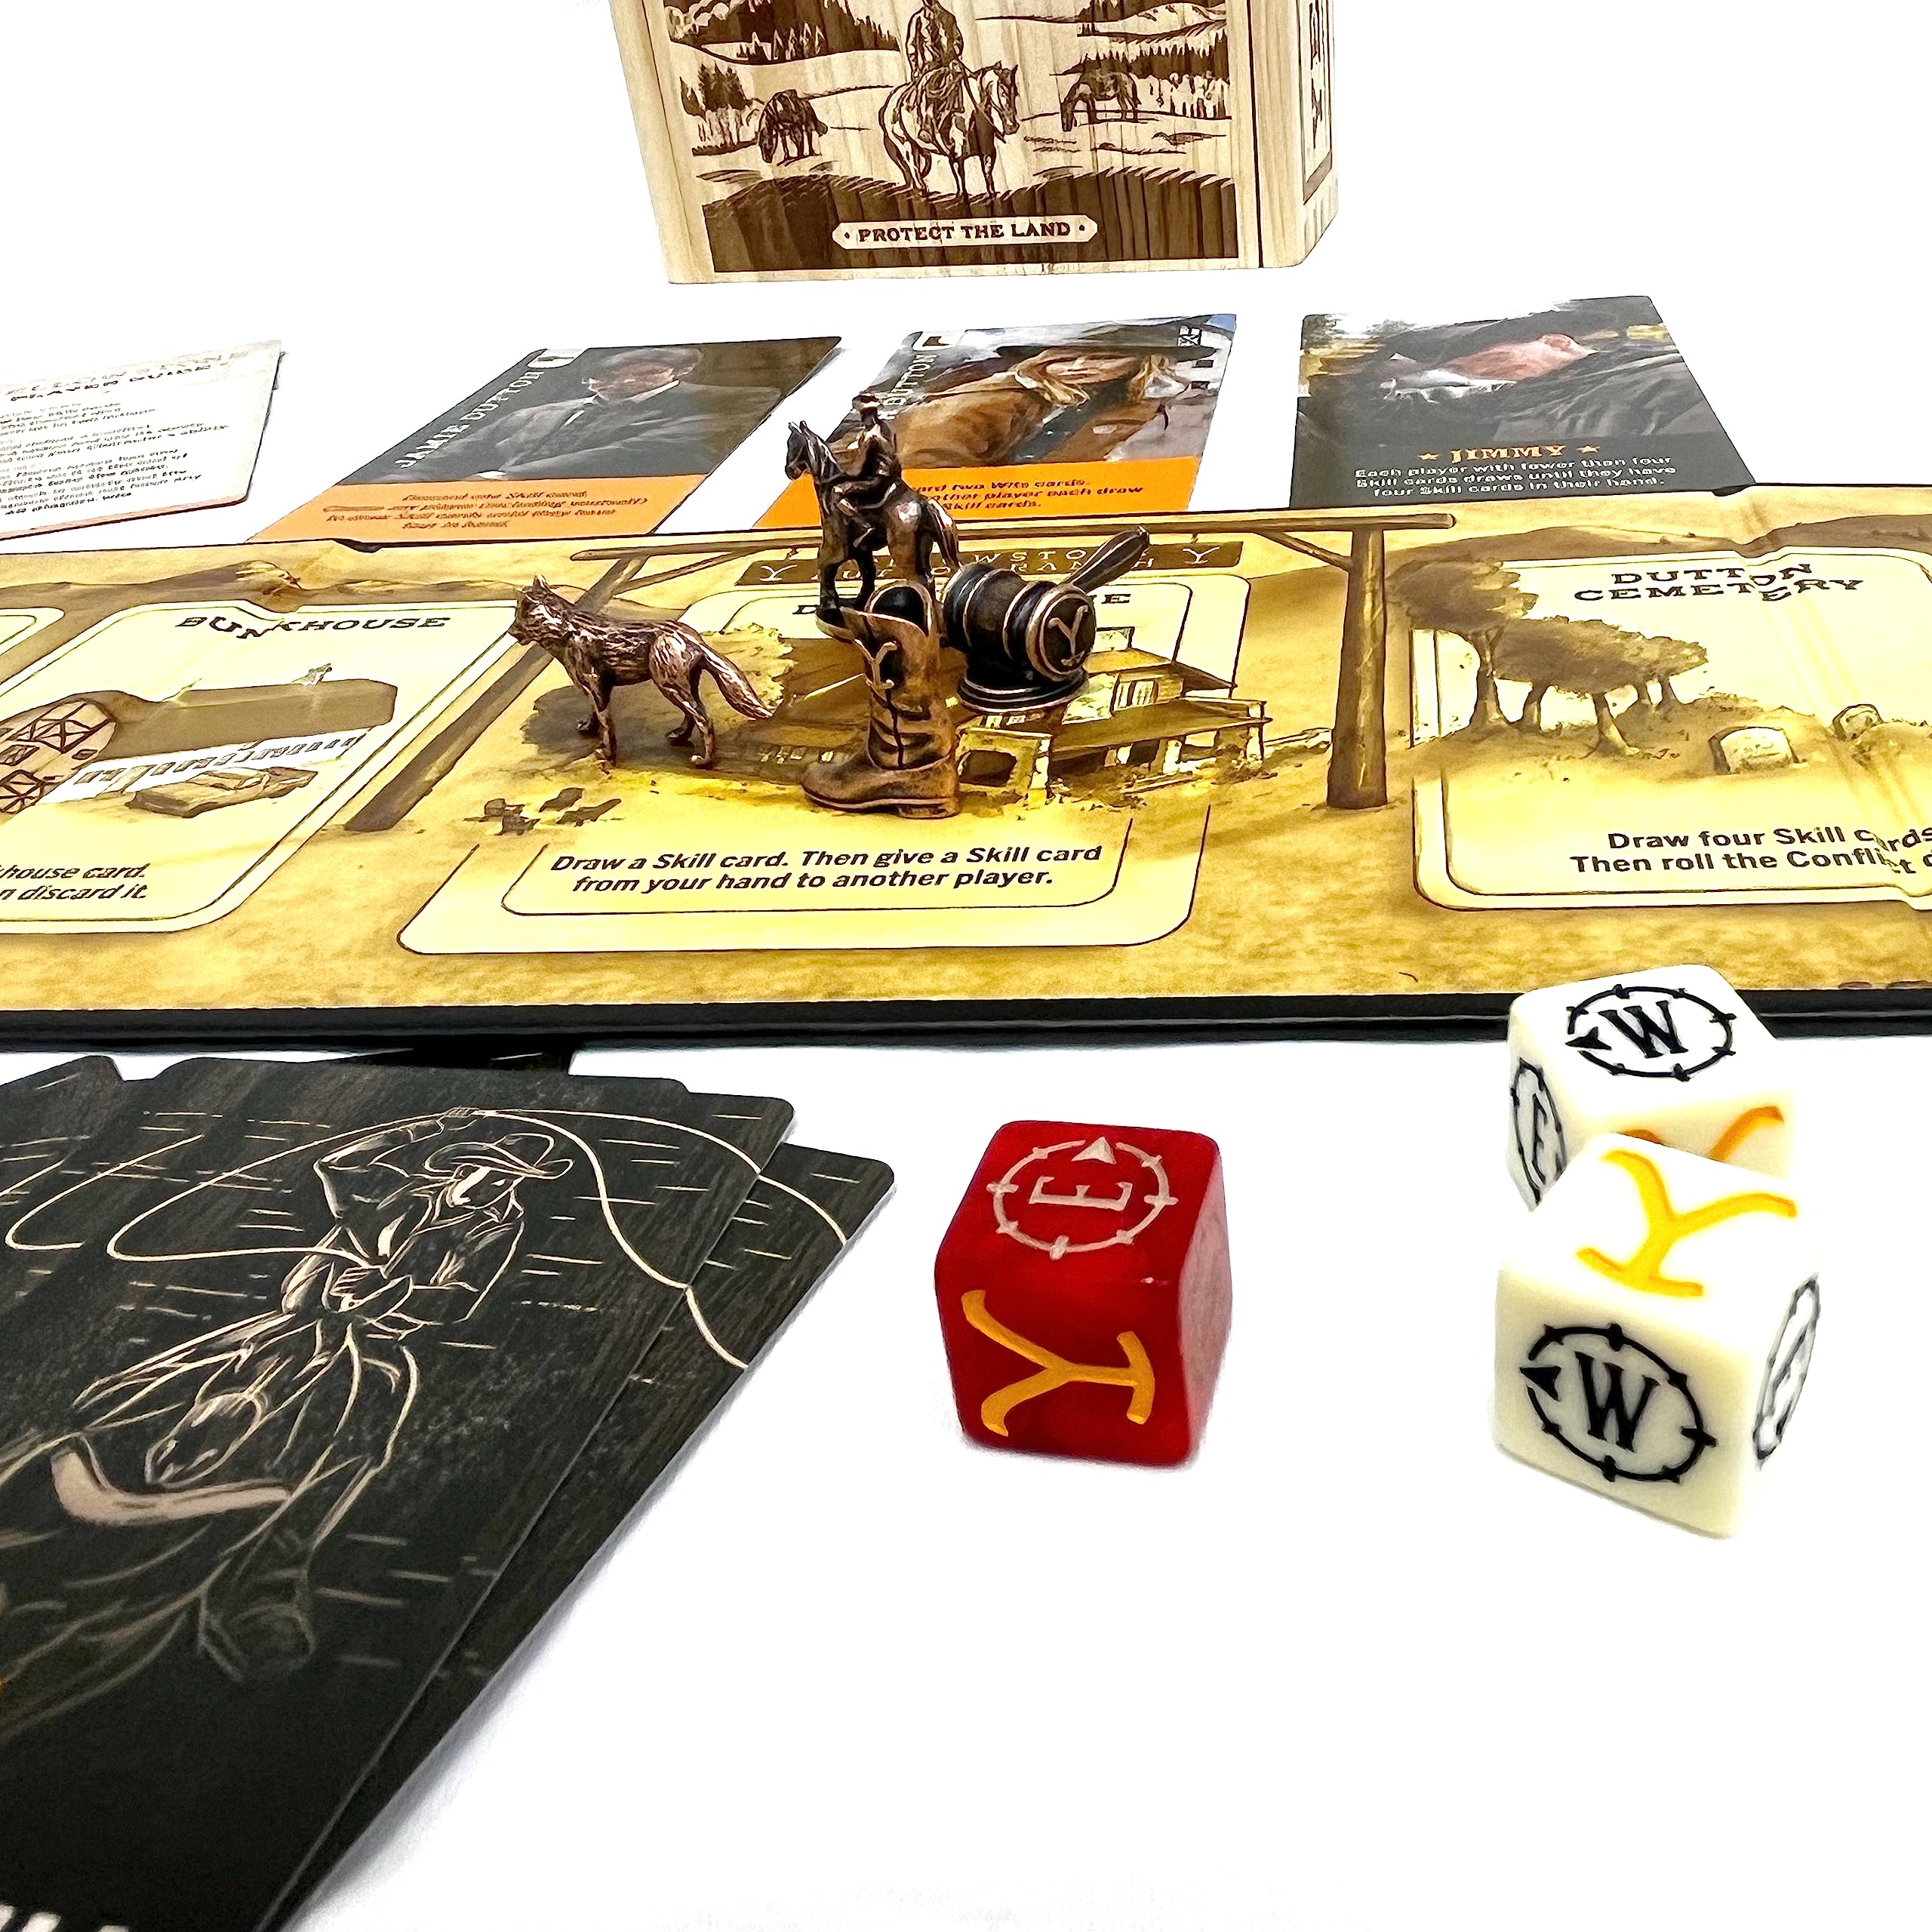 Yellowstone – The Cooperative Board Game for Adults and Your Next Game Night - Inspired by The Hit  Yellowstone TV Series, Great Gift - from Buffalo Games